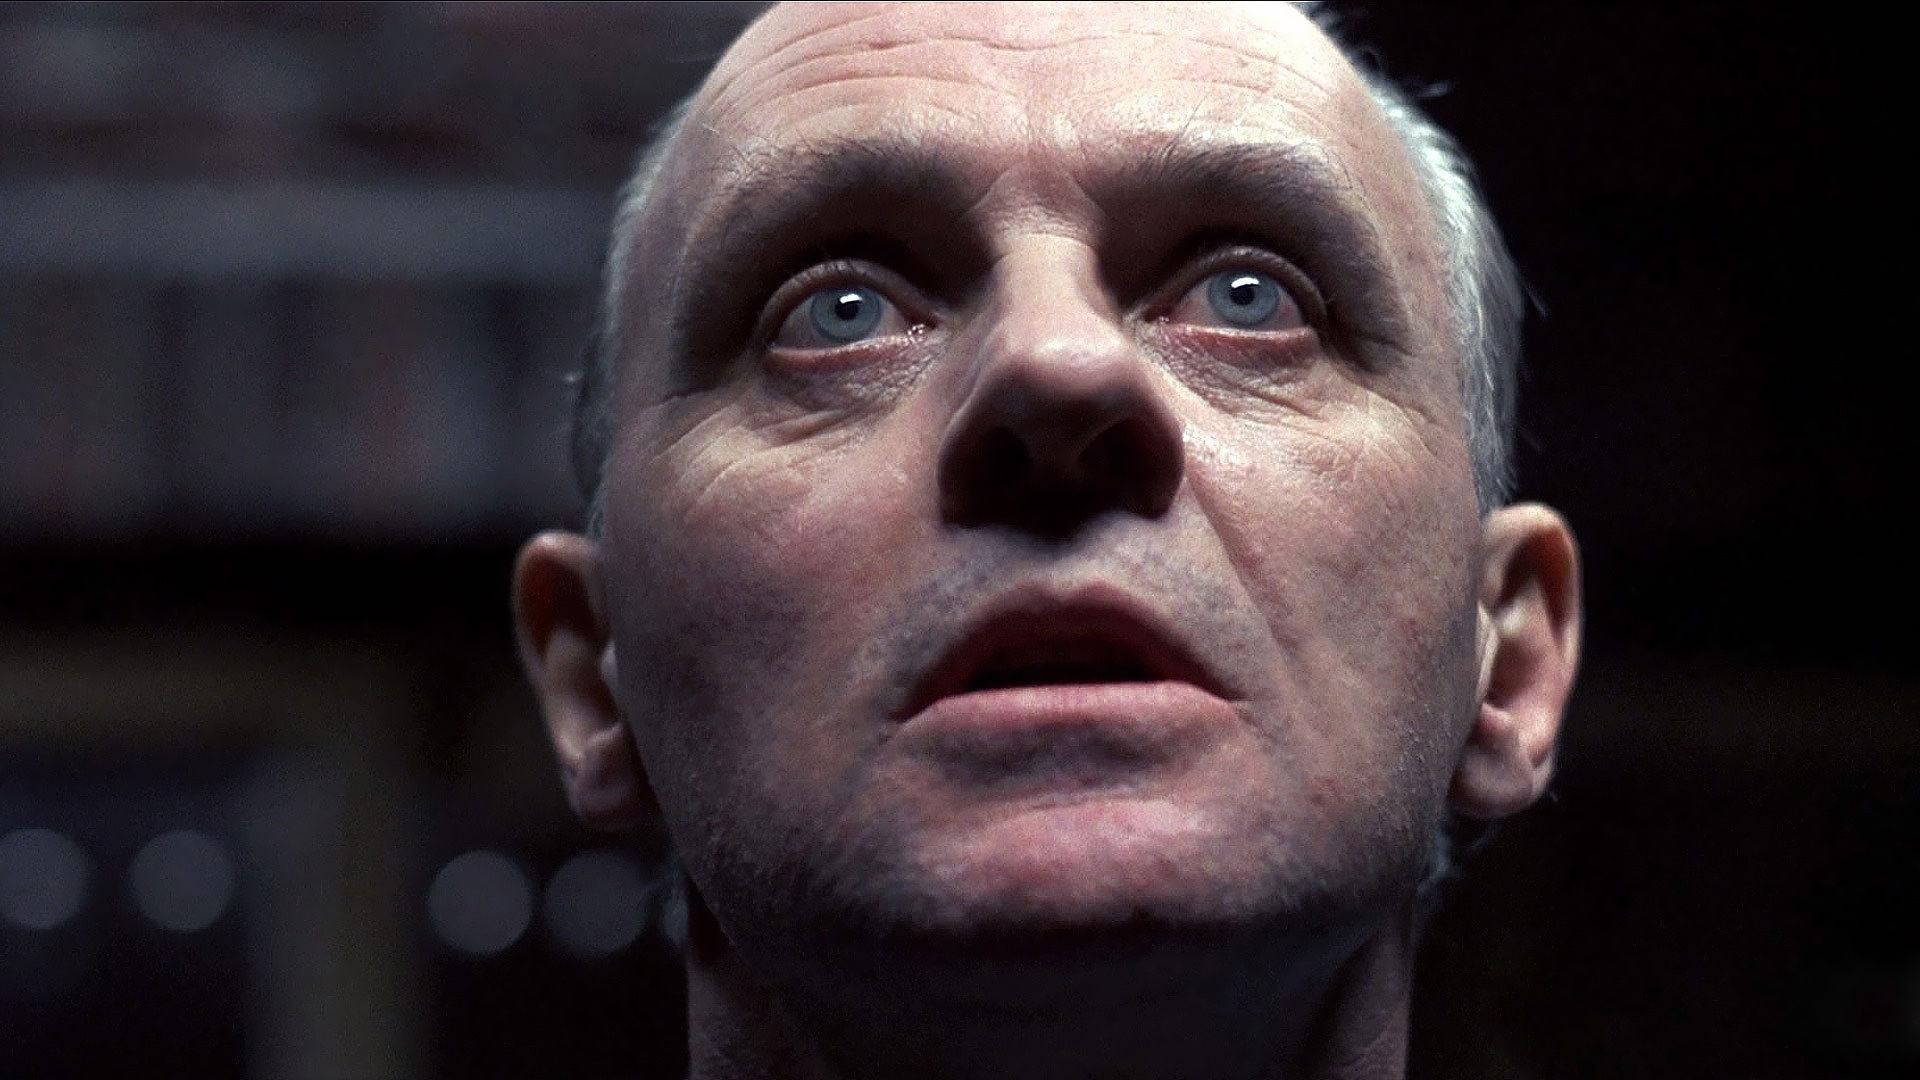 1920x1080 THE SILENCE OF THE LAMBS thriller drama dark h wallpaper .